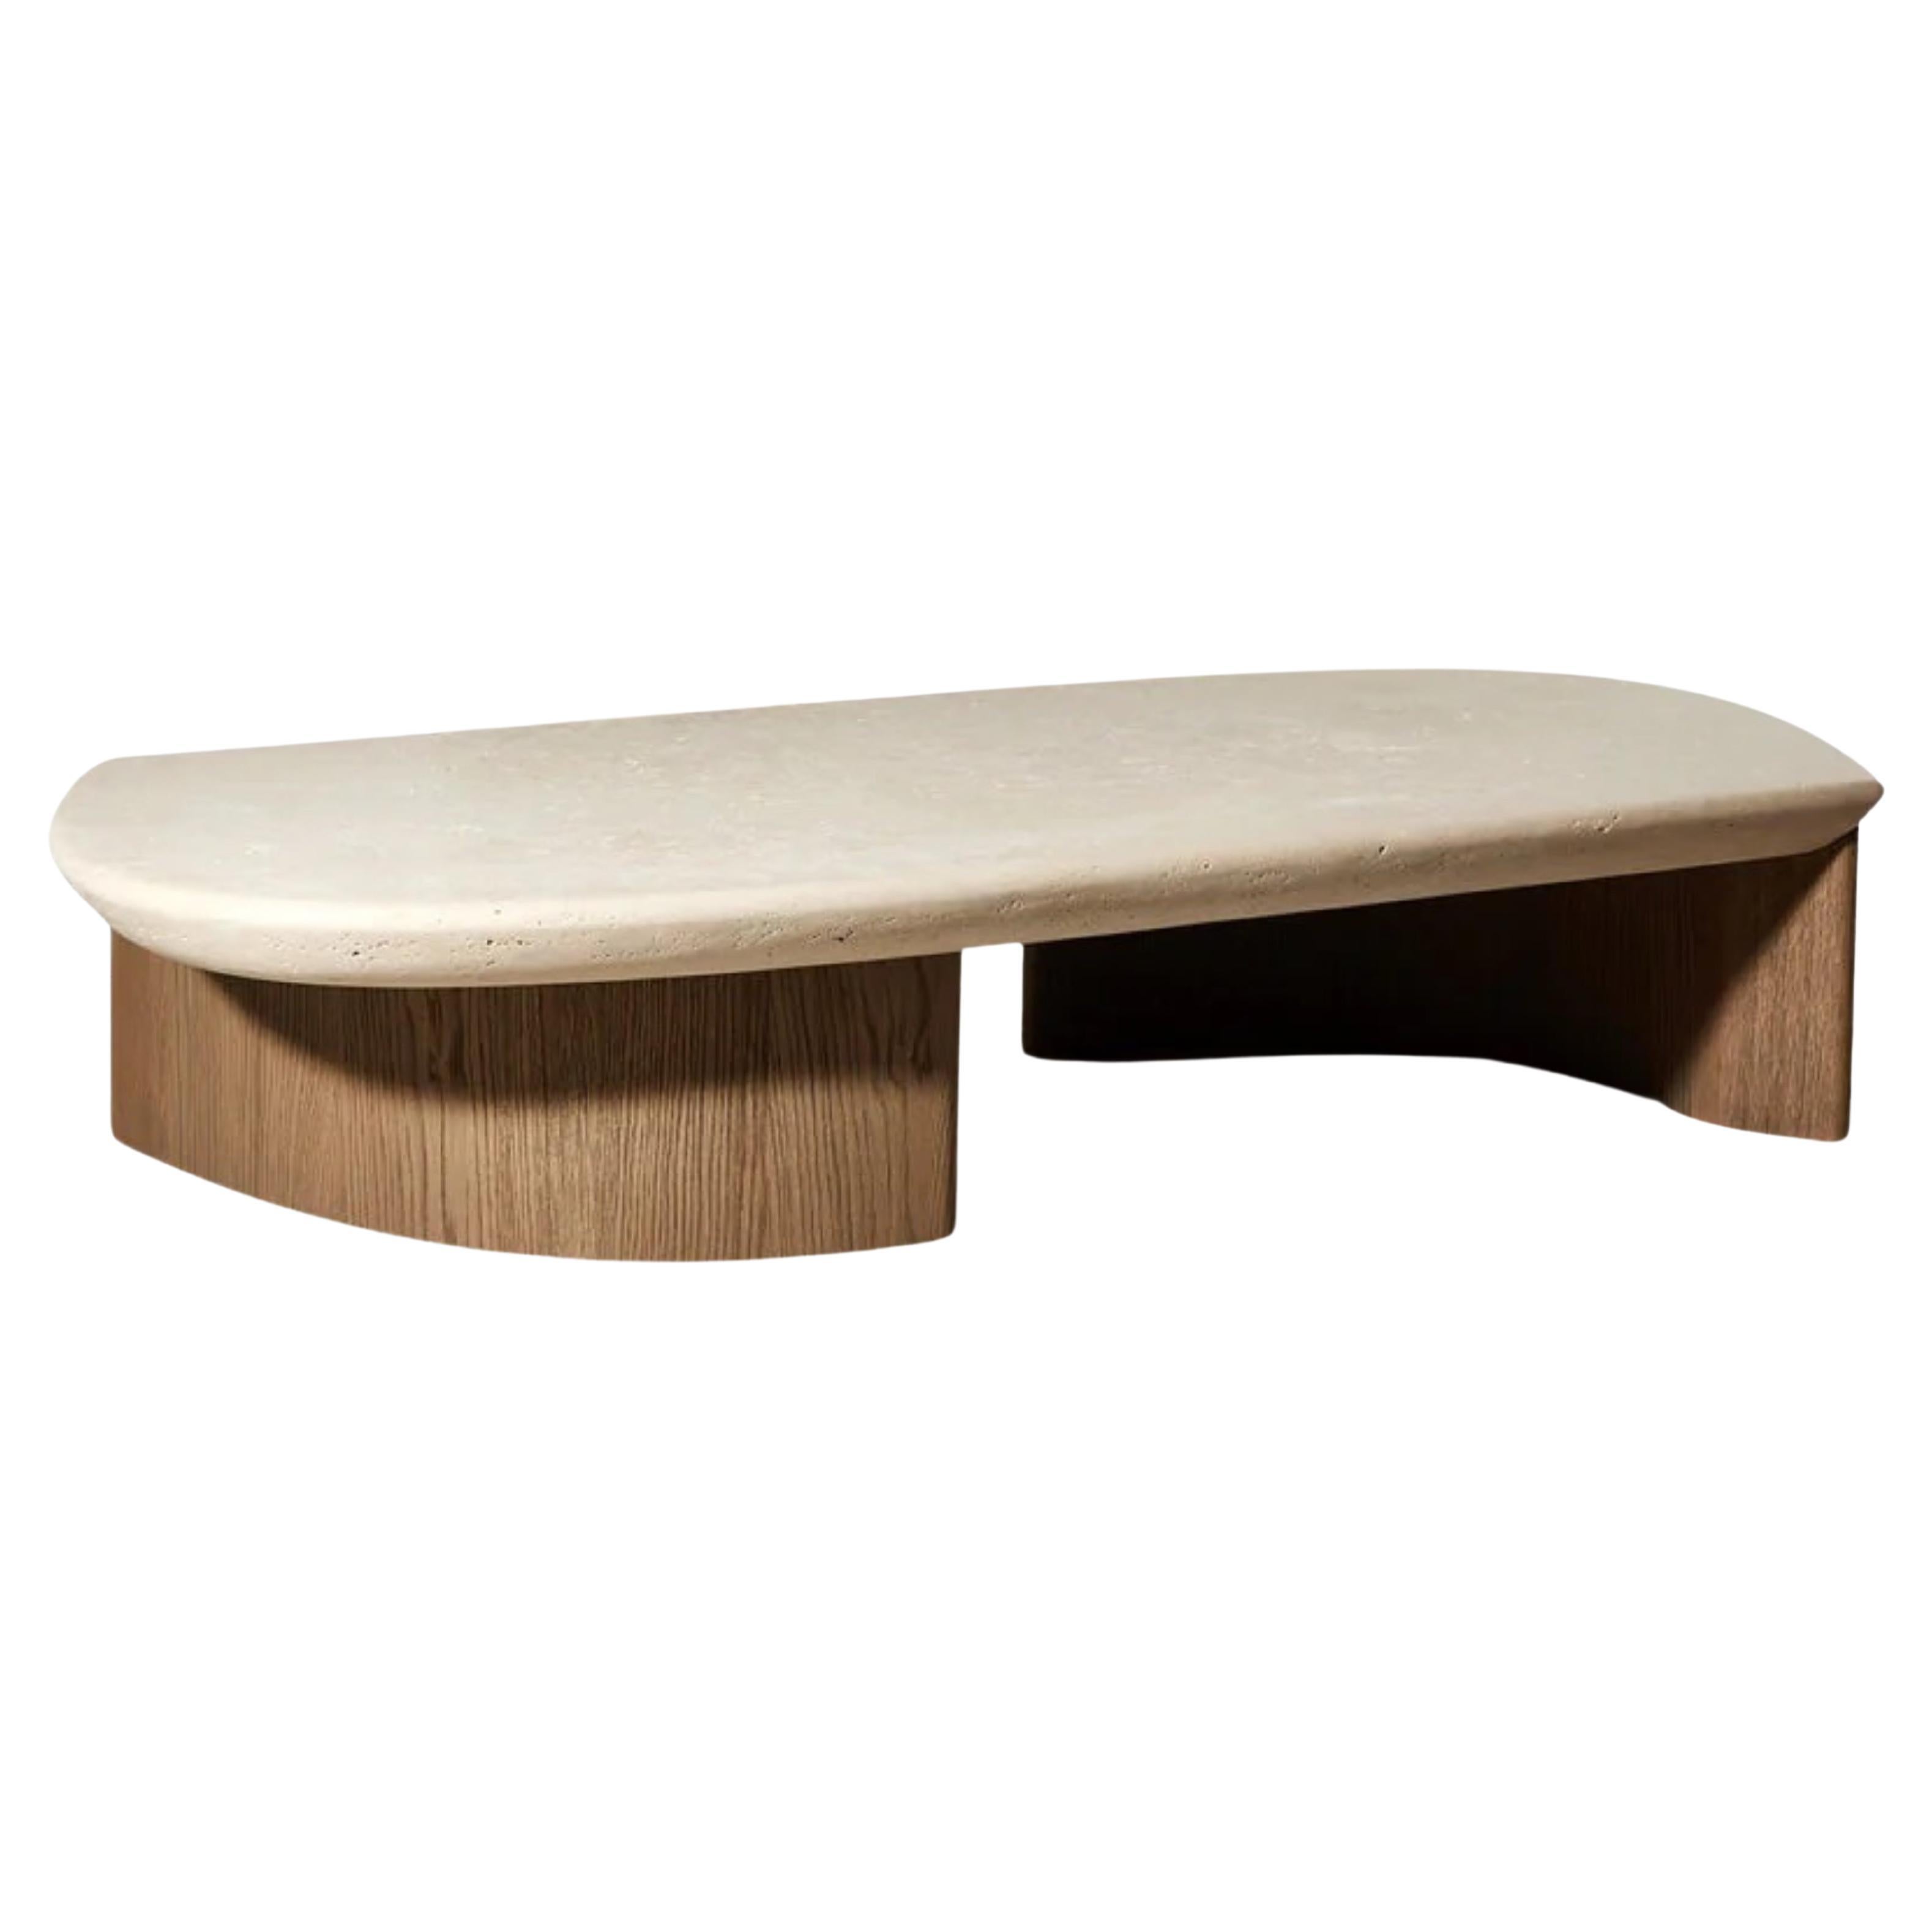 Travertine Coffee table with Wooden Legs For Sale